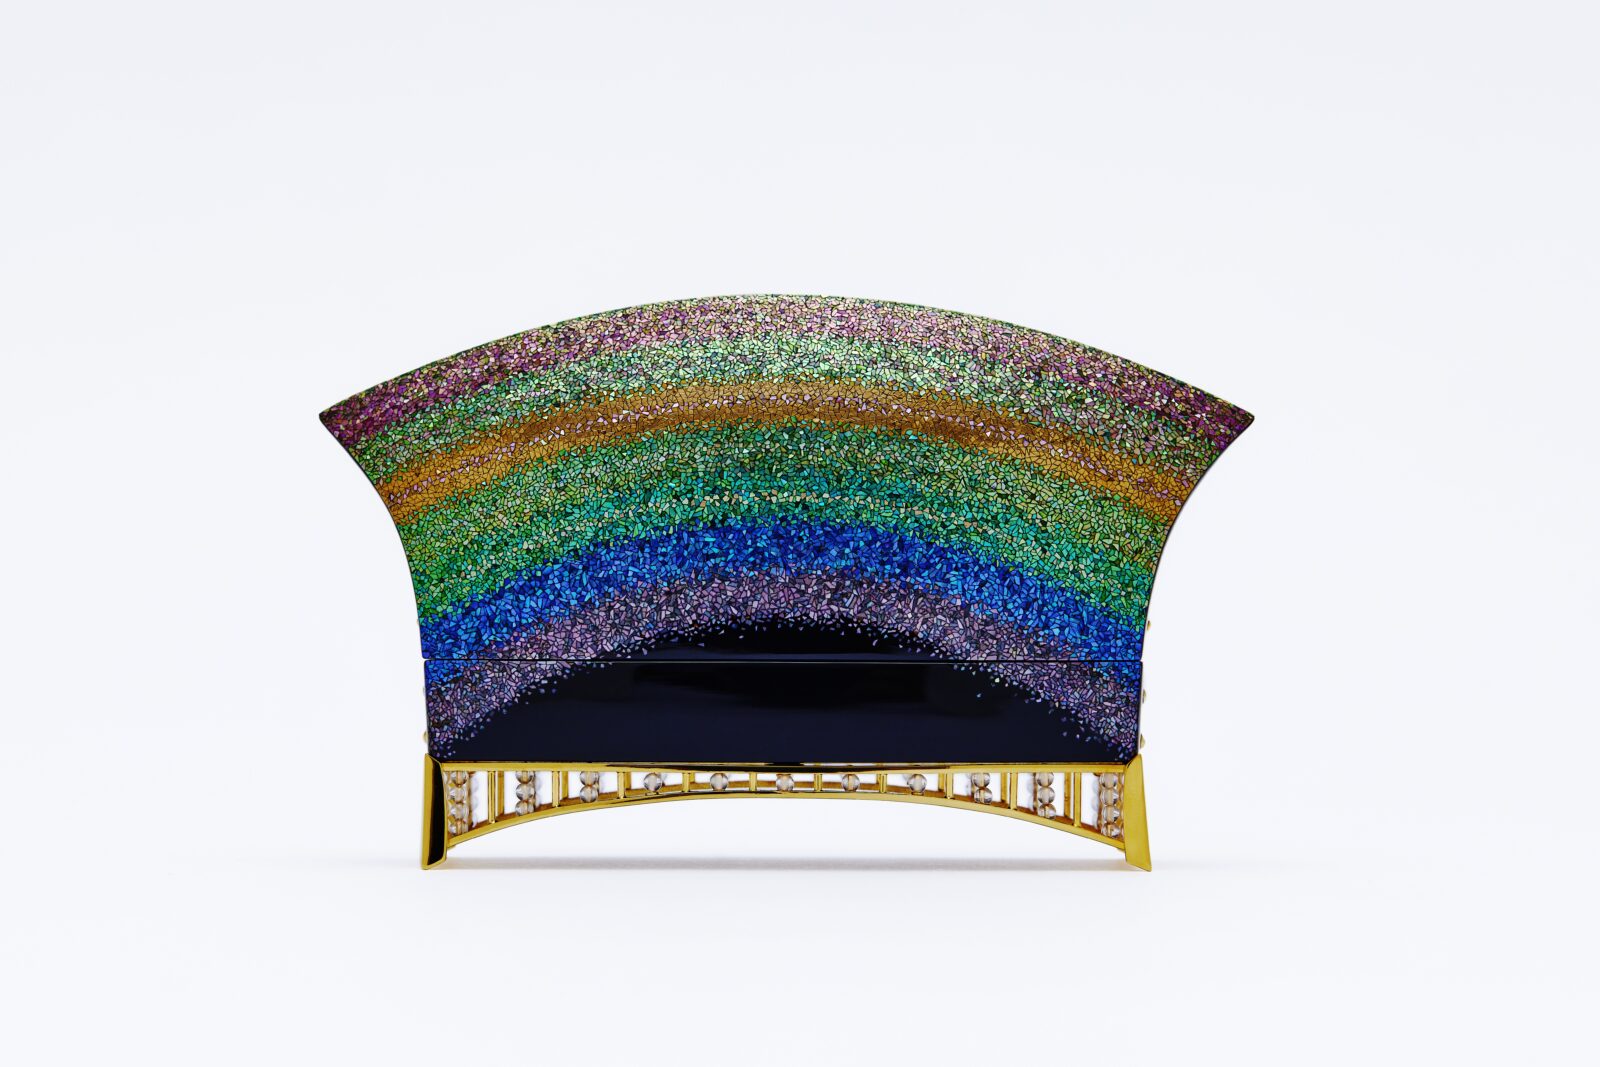 (Arch Shaped Incense Container with Inlaid Gold and Mother-of-pearl,) “Rainbow”